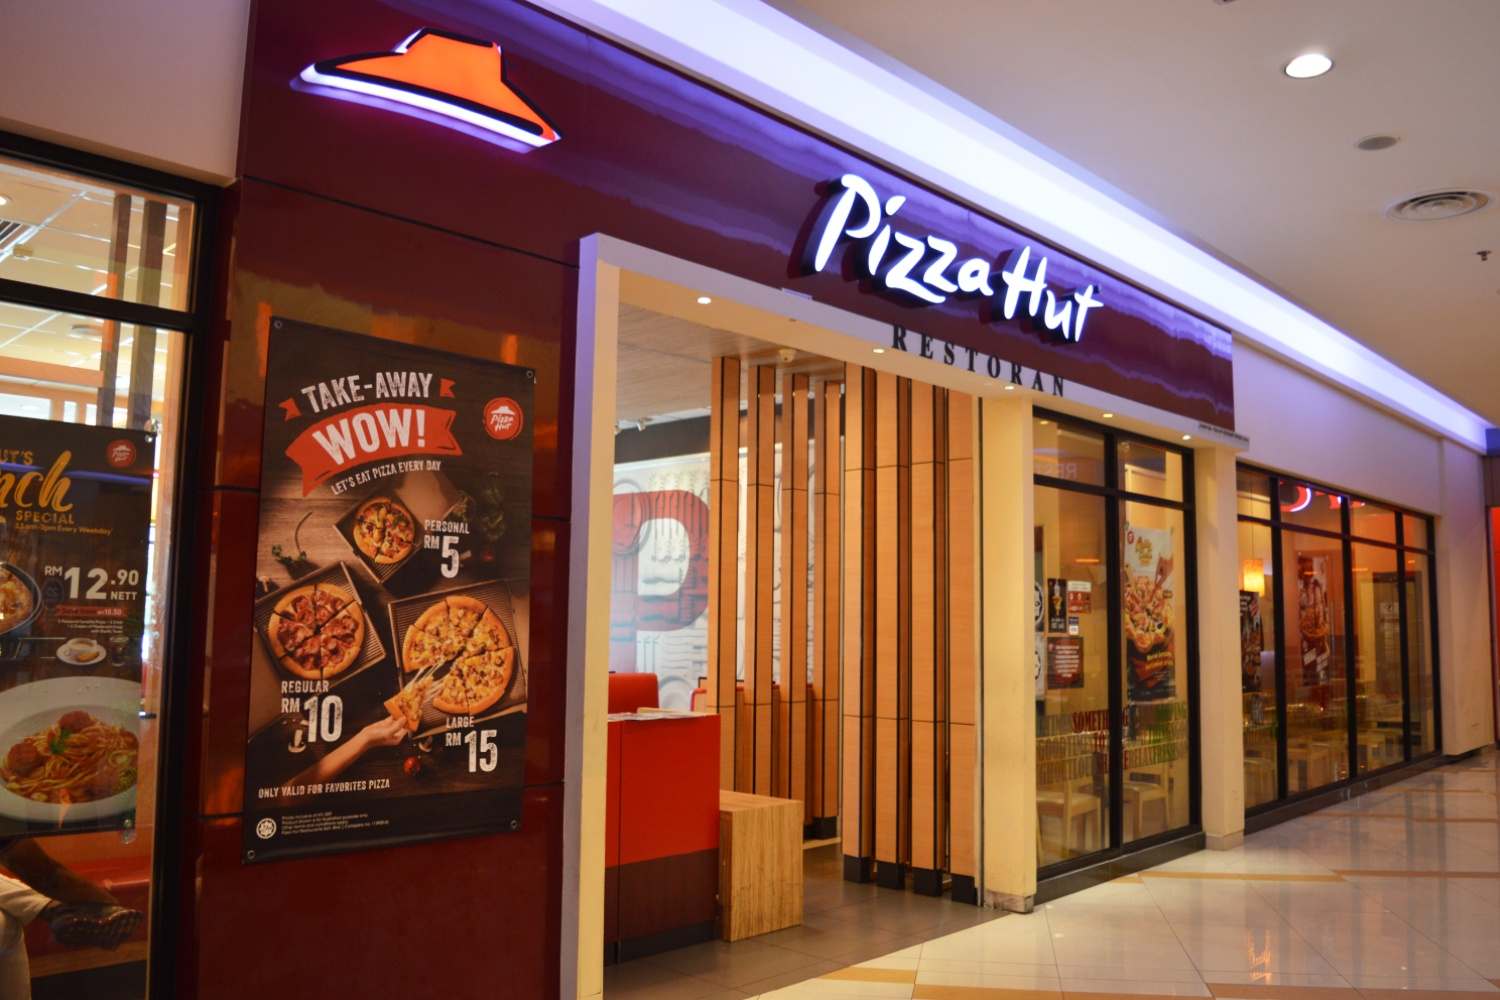 M’sian man drives to pizza hut outlet after online order fails to arrive after 2 hours